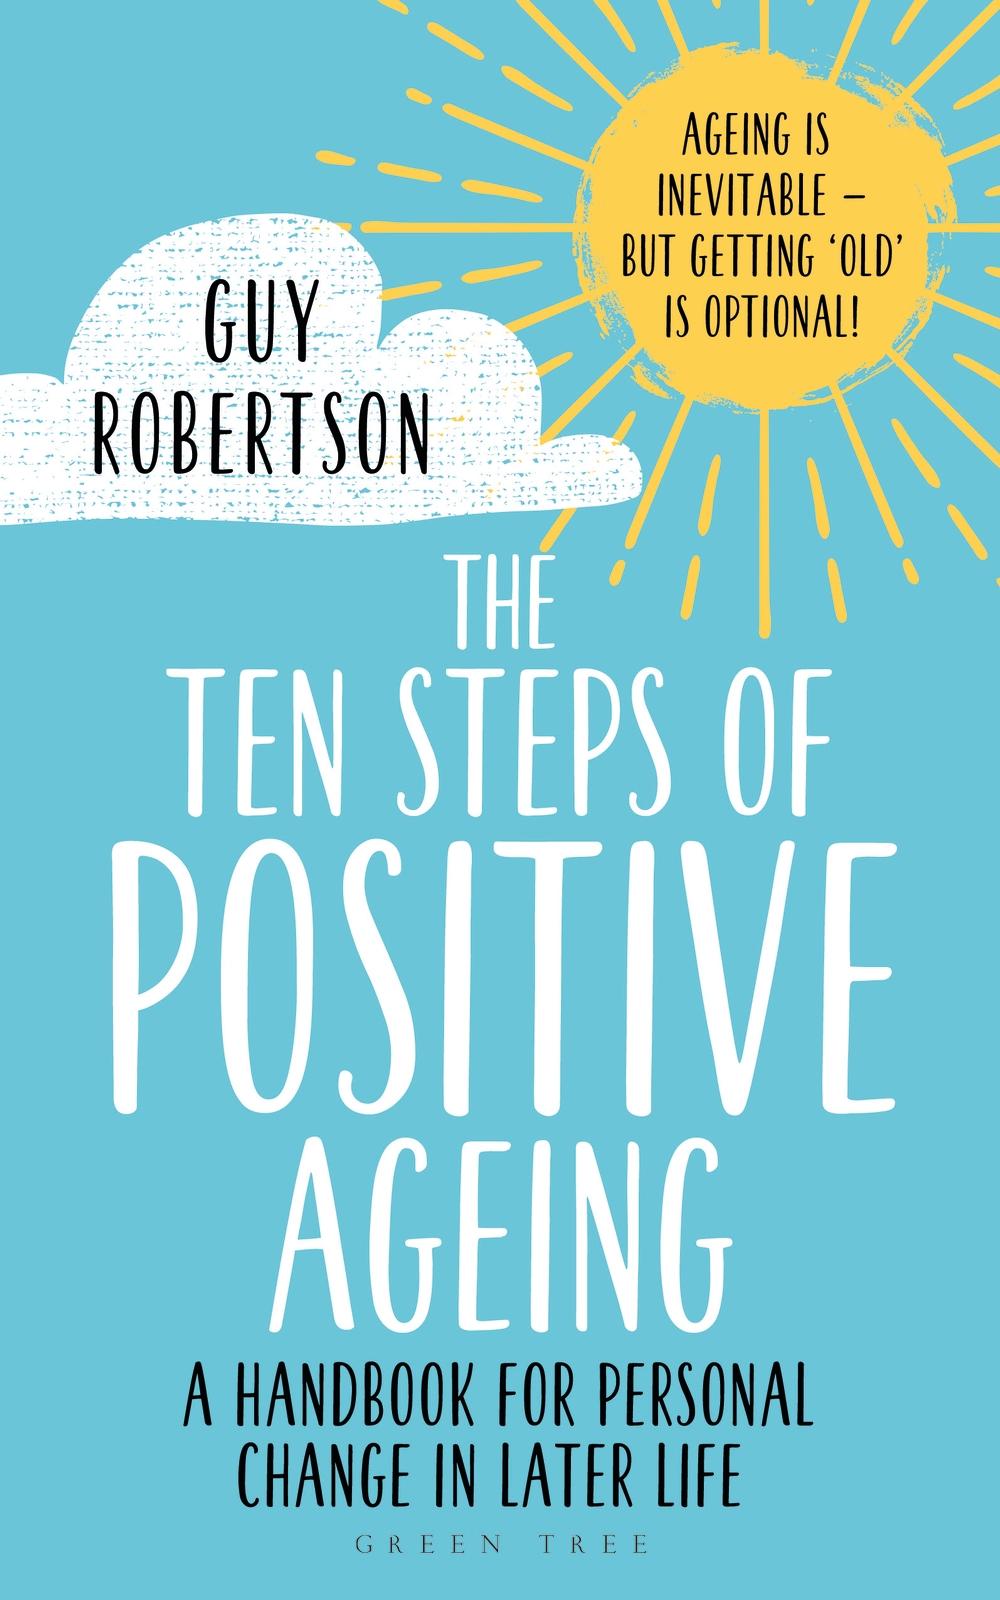 Ten Steps of Positive Ageing - Guy Robertson